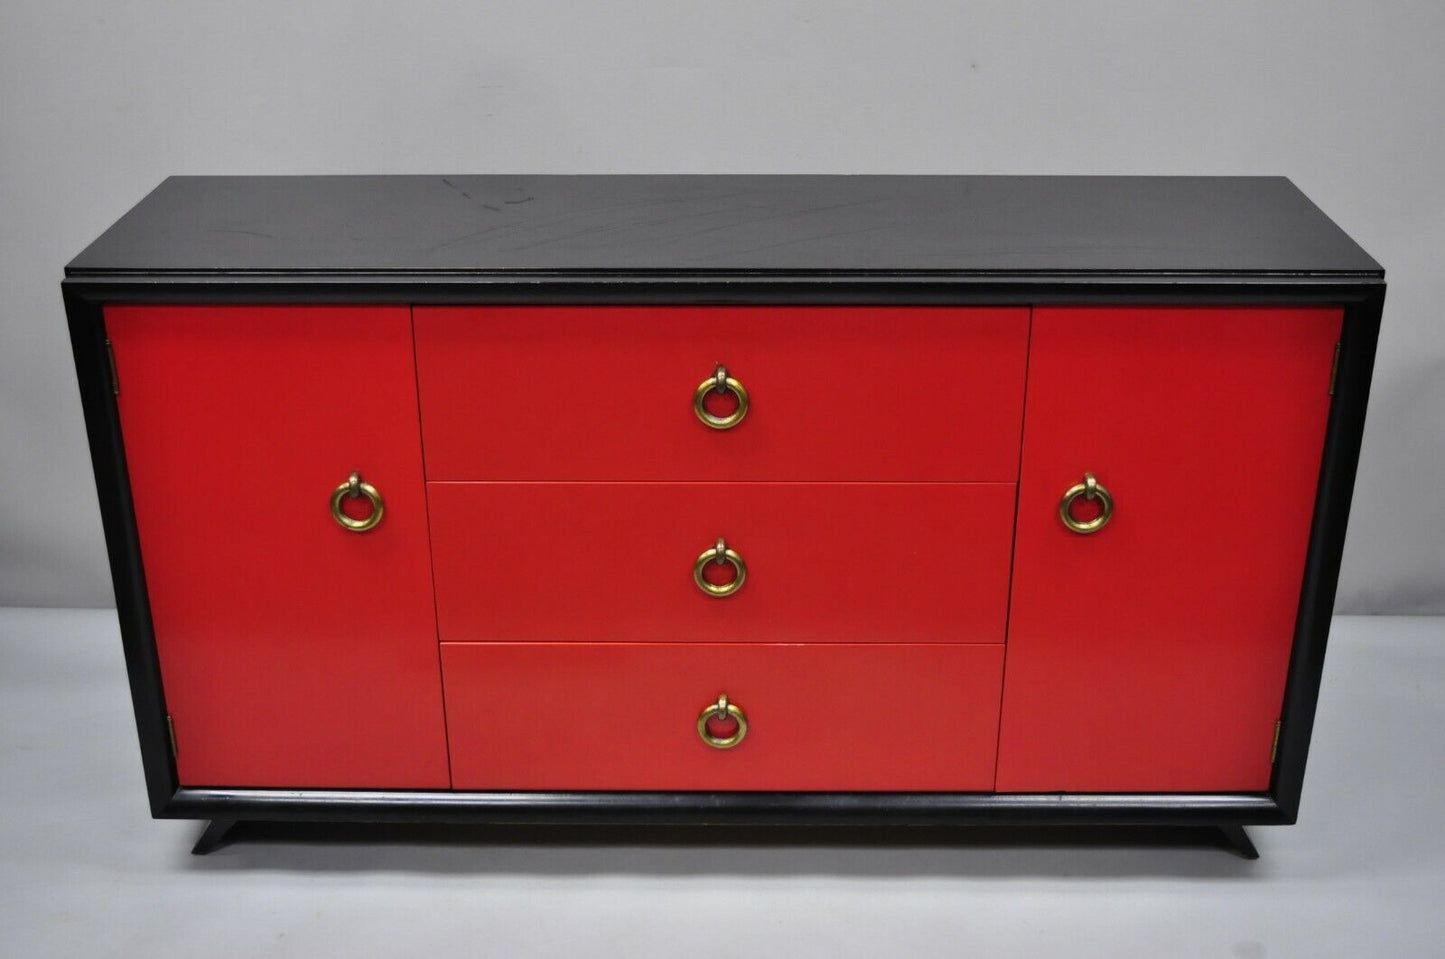 Mid Century Modern Art Deco Black and Red Credenza Cabinet Sideboard by Harjer